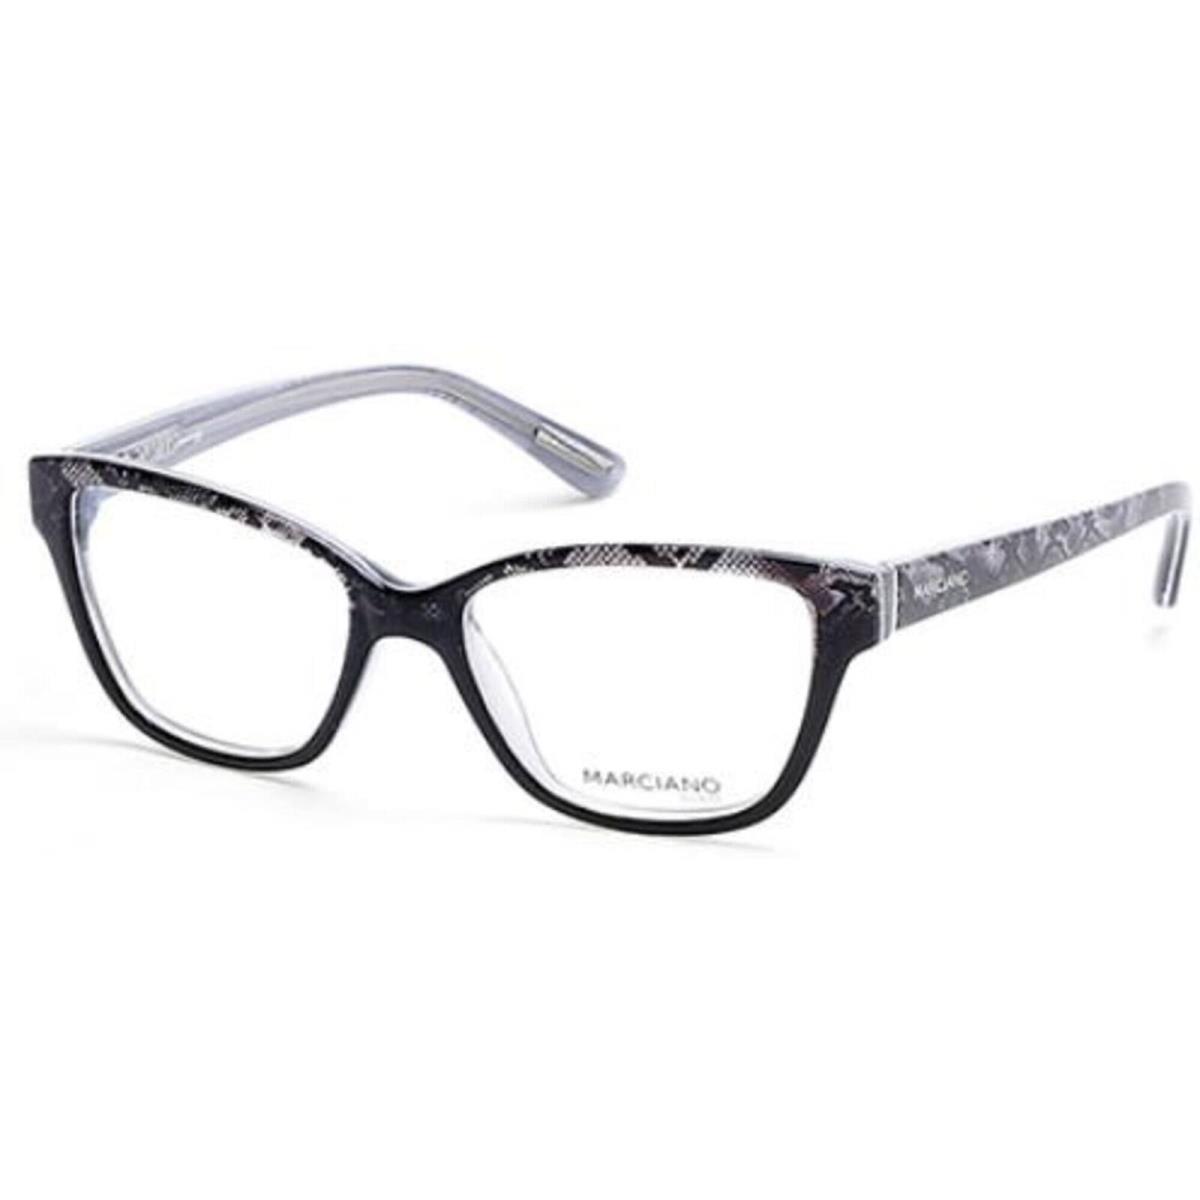 Guess By Marciano Women`s Eyeglasses Full Rim Black/other Plastic Frame GM0280 5